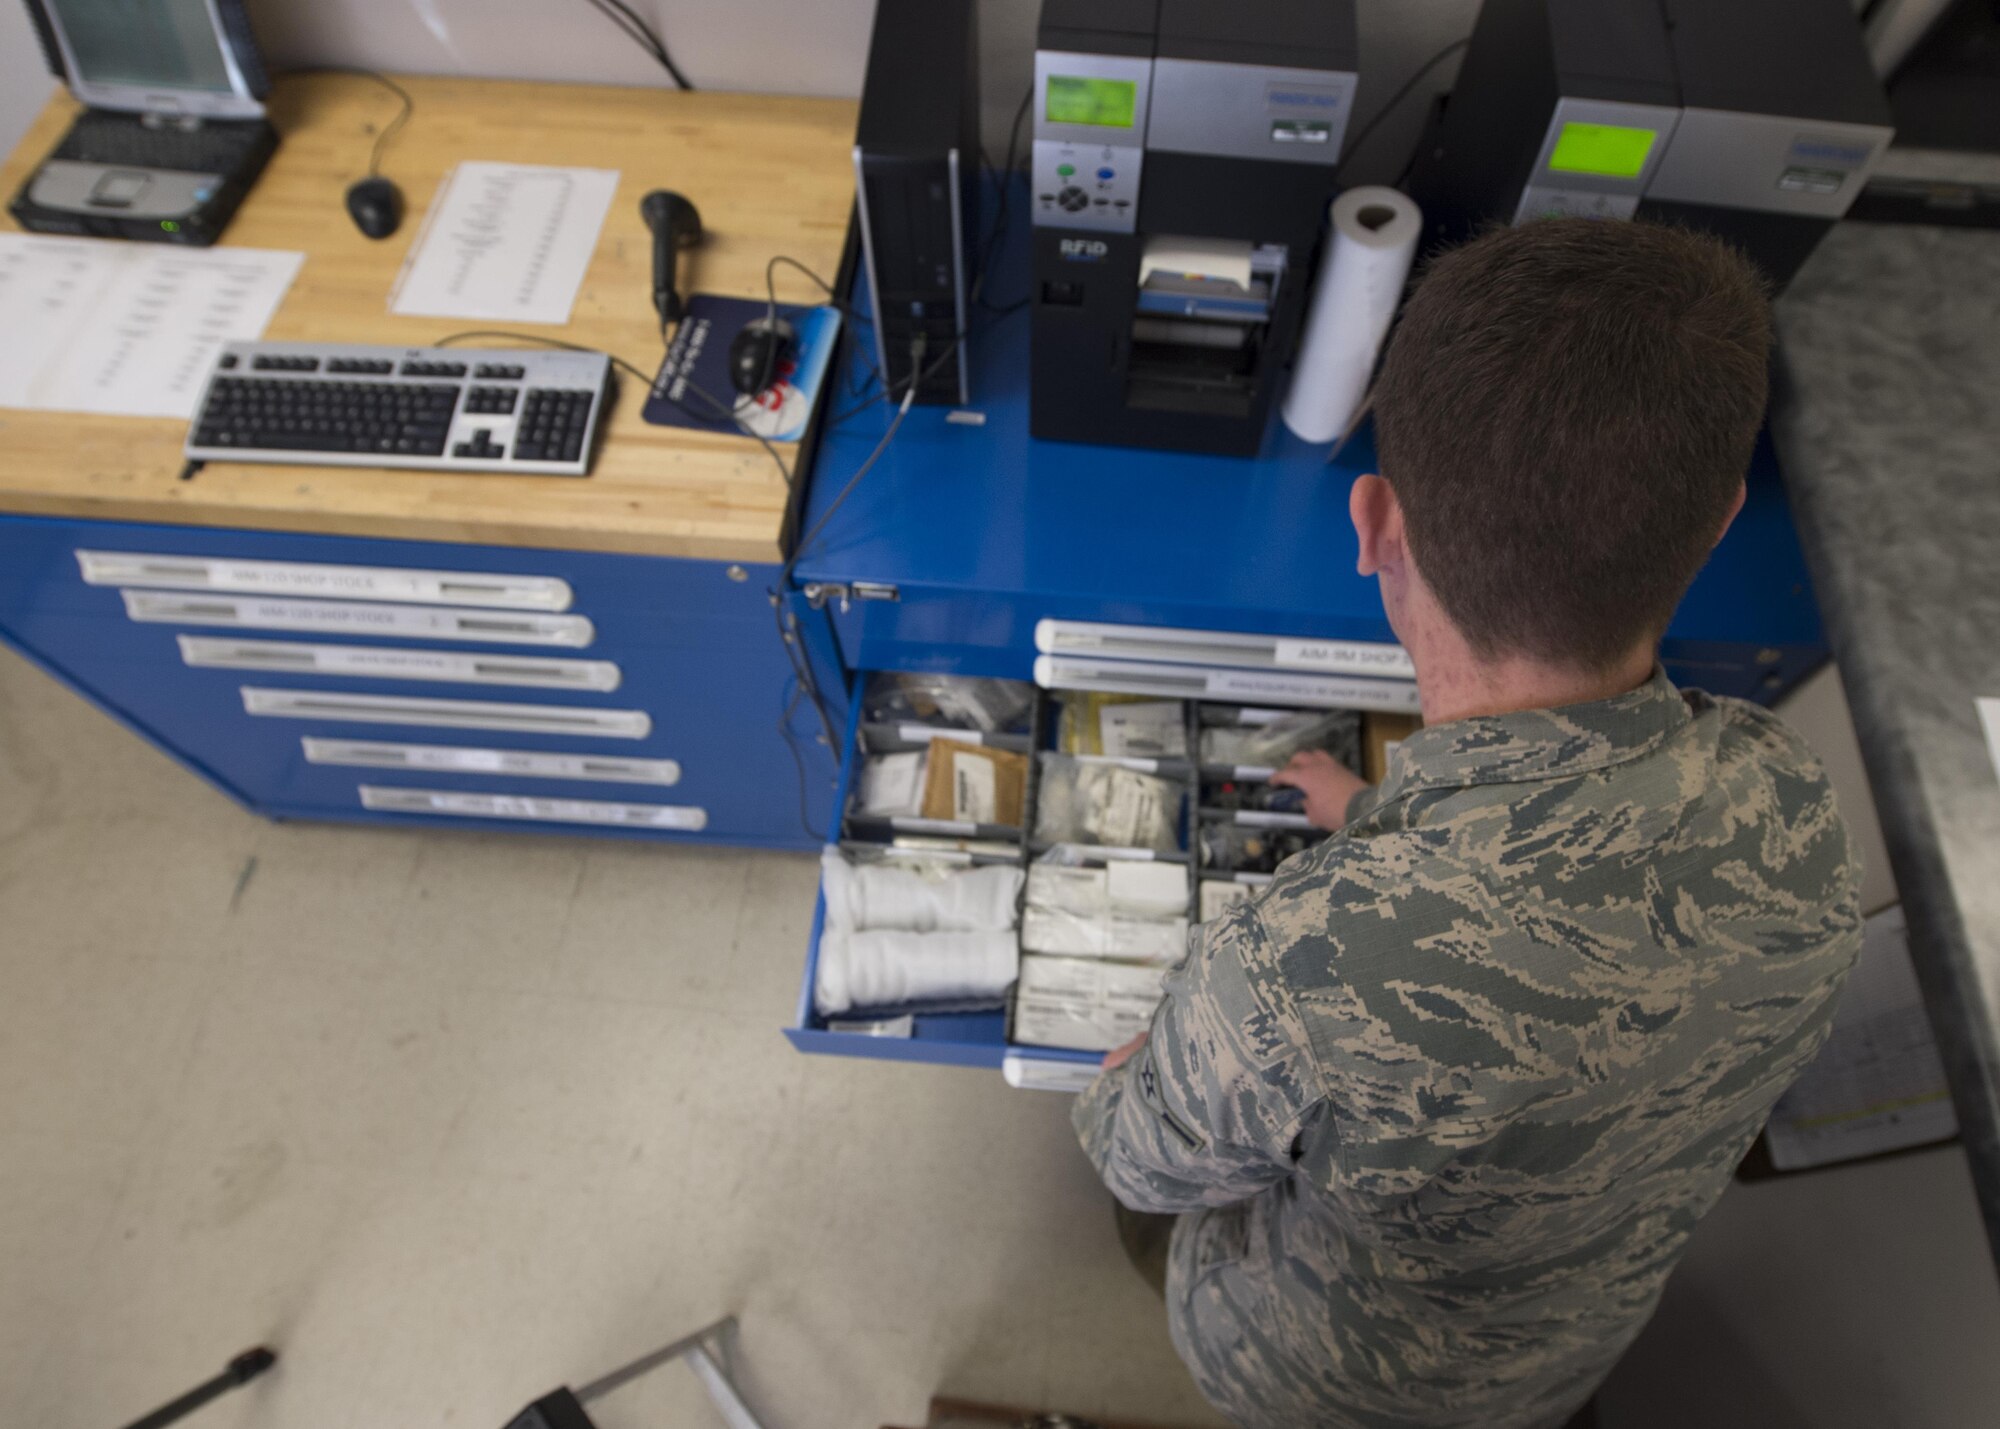 Airman Phillip Tashash, a 49th Maintenance Squadron munitions specialist, searches through asset drawers that are inventoried by the Ammo flight’s new Automated Supply Accountability Program, Jan. 9, 2017, at Holloman Air Force Base, N.M. The ASAP is a new program that Holloman’s Ammo flight uses to track quantity and prices of assets. Tashash created the program, which allows personnel to perform accurate transactions in 10 seconds, rather than five minutes with the old system. (U.S. Air Force photo by Senior Airman Emily Kenney)